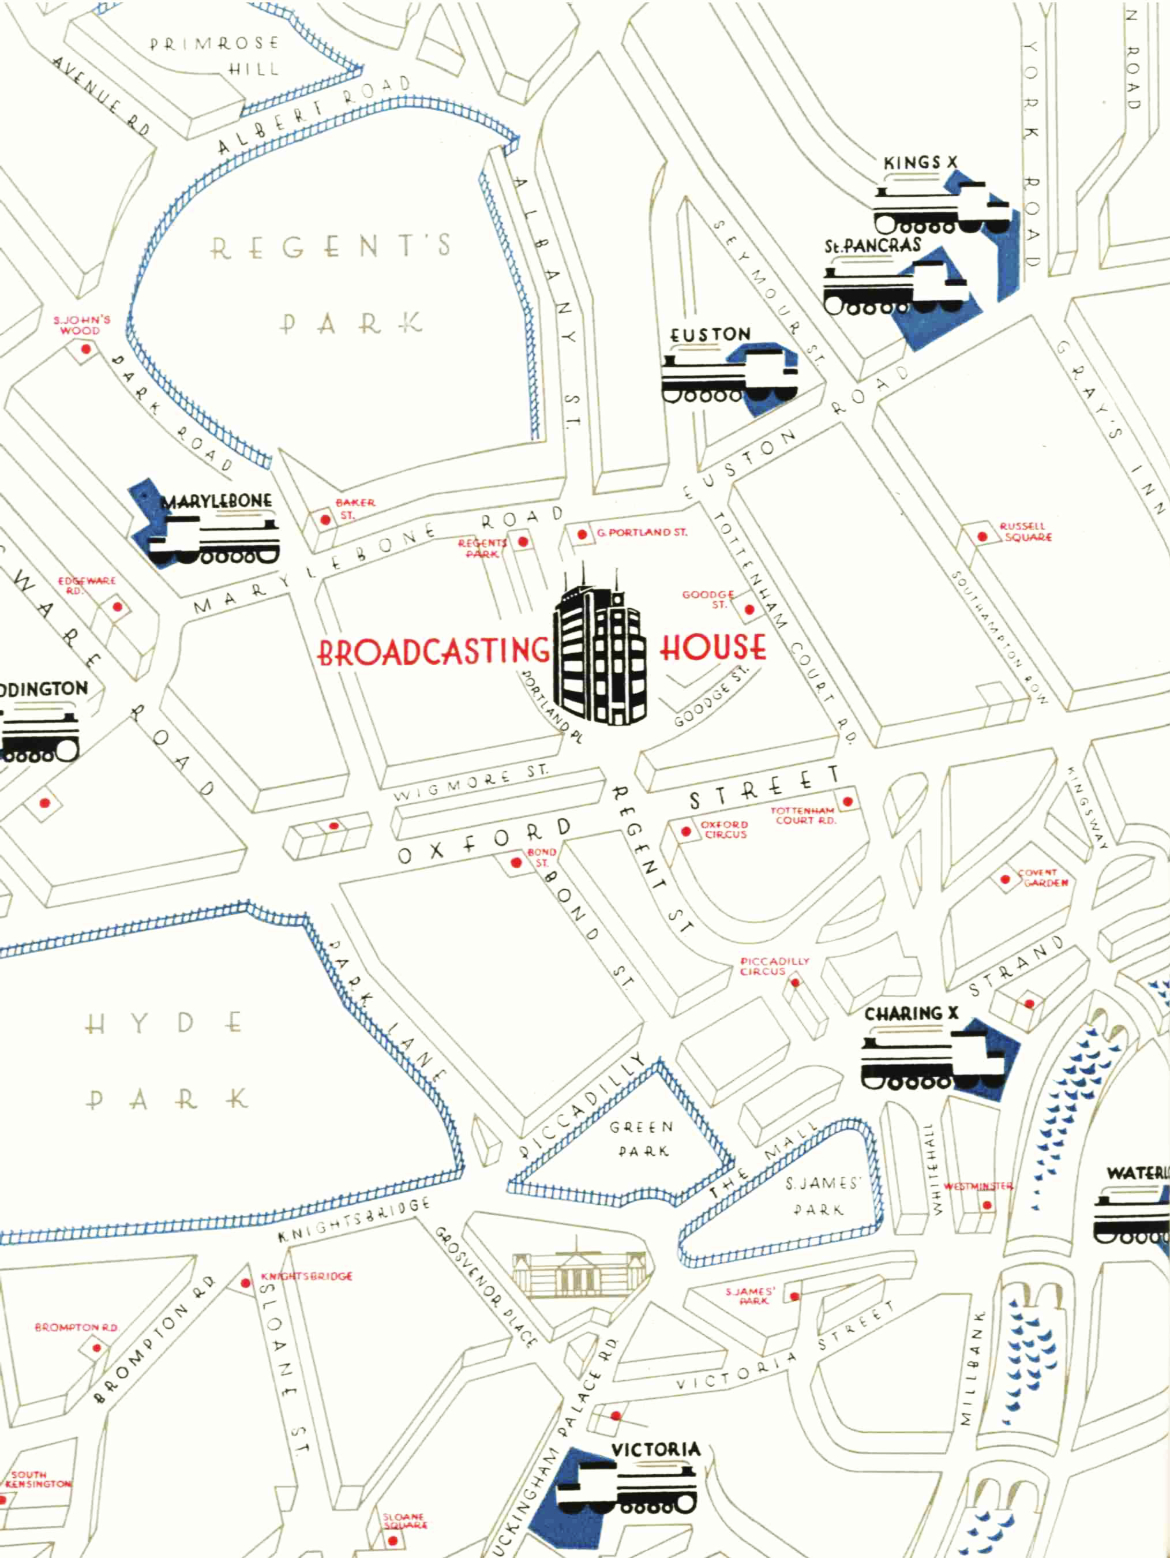 A map of the area of central London surrounding the new Broadcasting House building